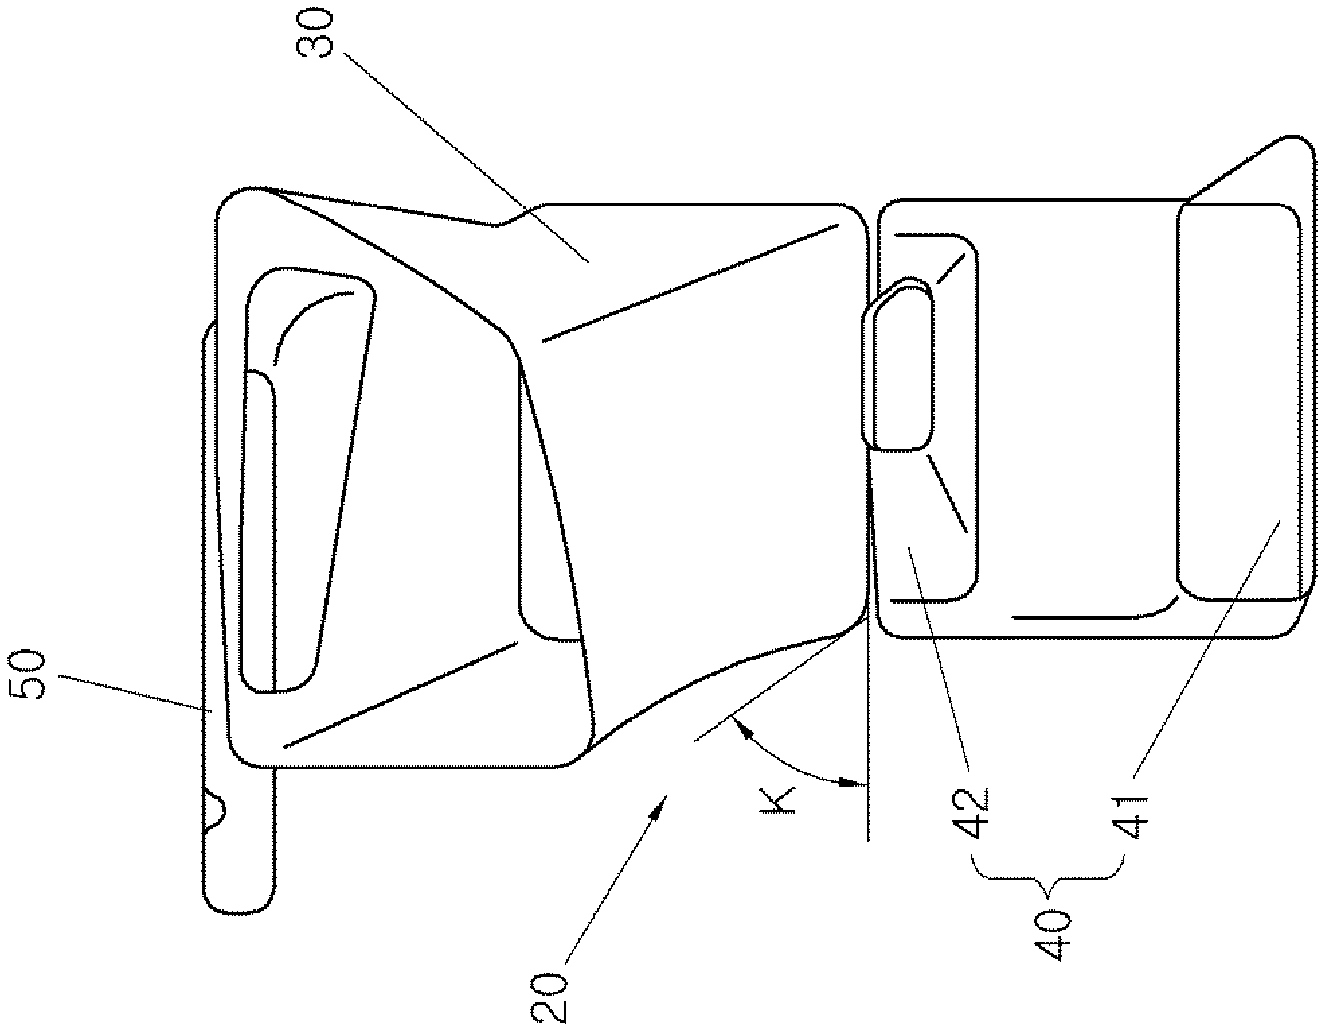 Wind flux concentration guiding device and engine room layout thereof